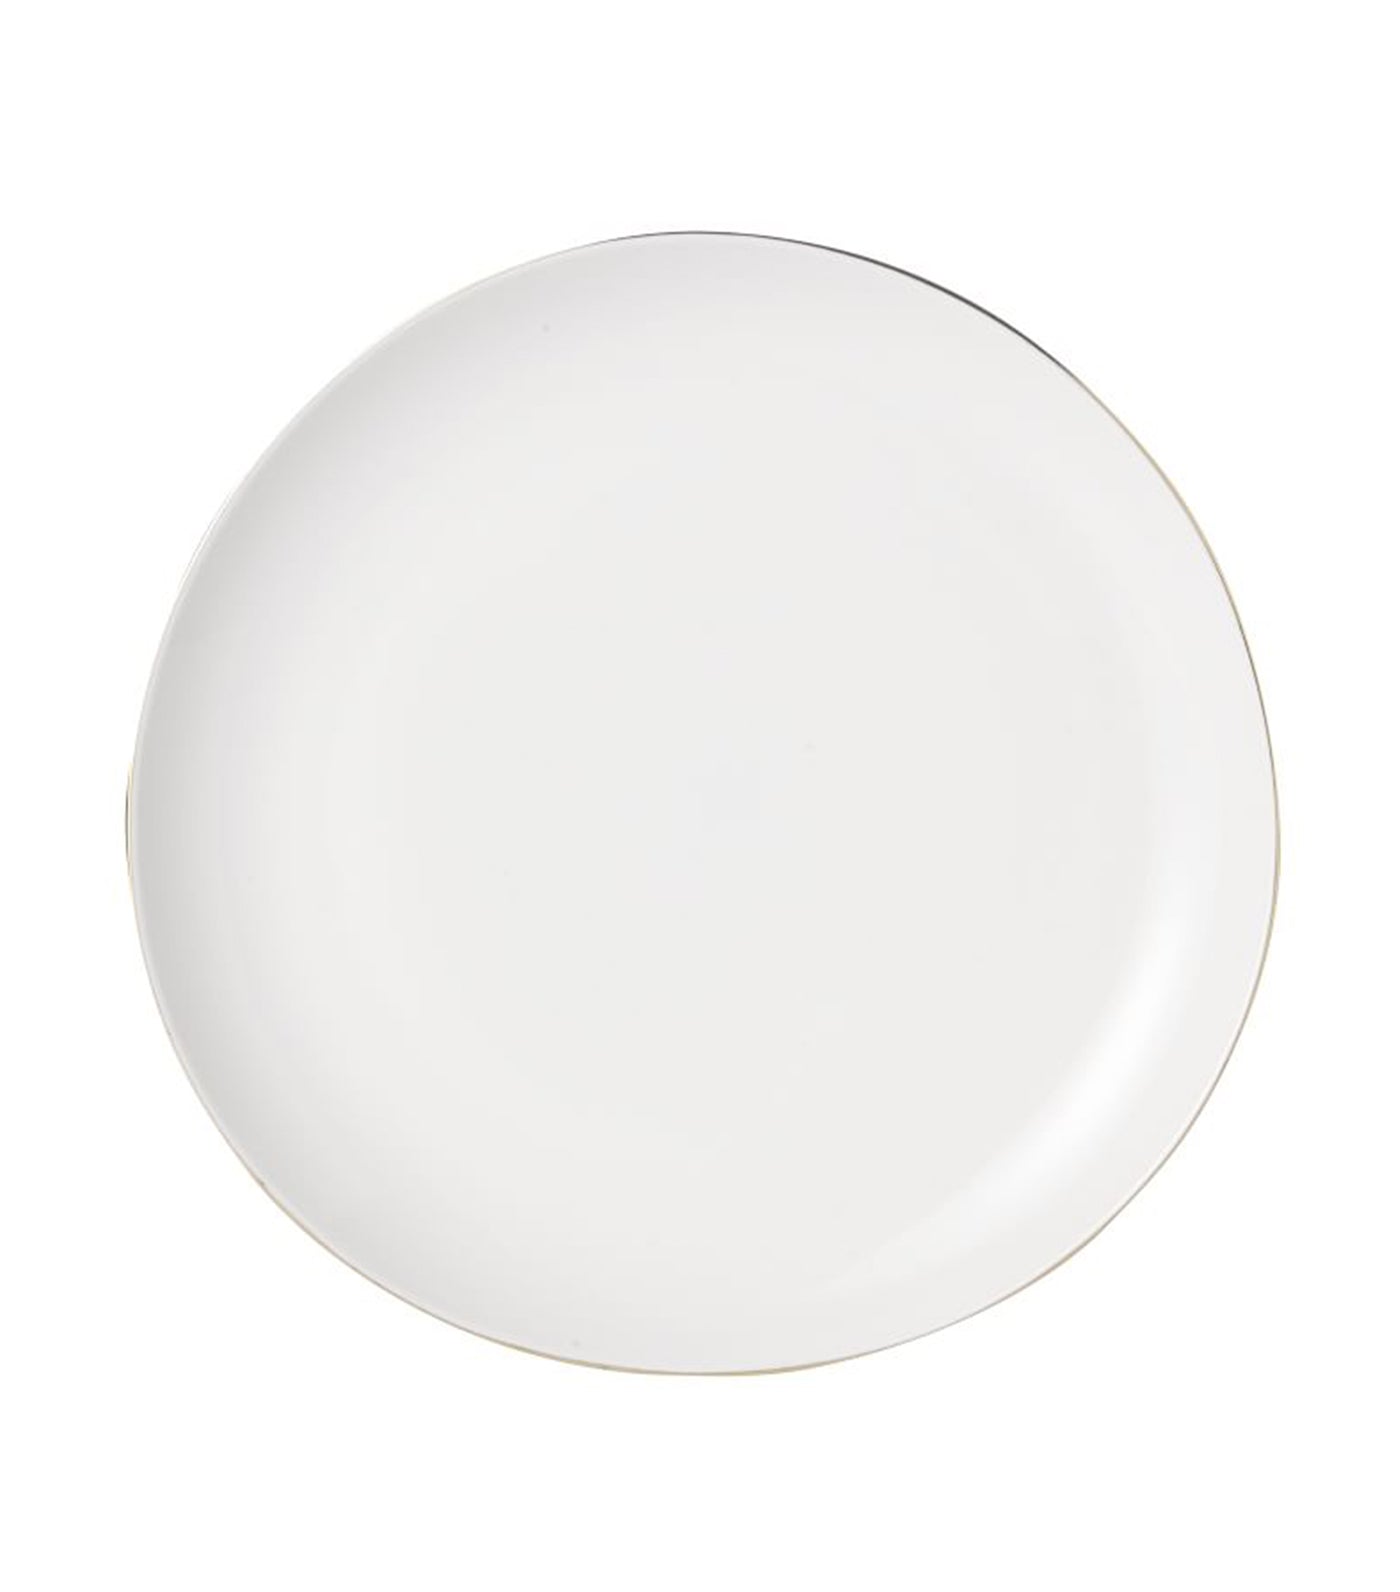 West Elm Organic Shaped Gold Rim Dinnerware Collection - Salad Plate